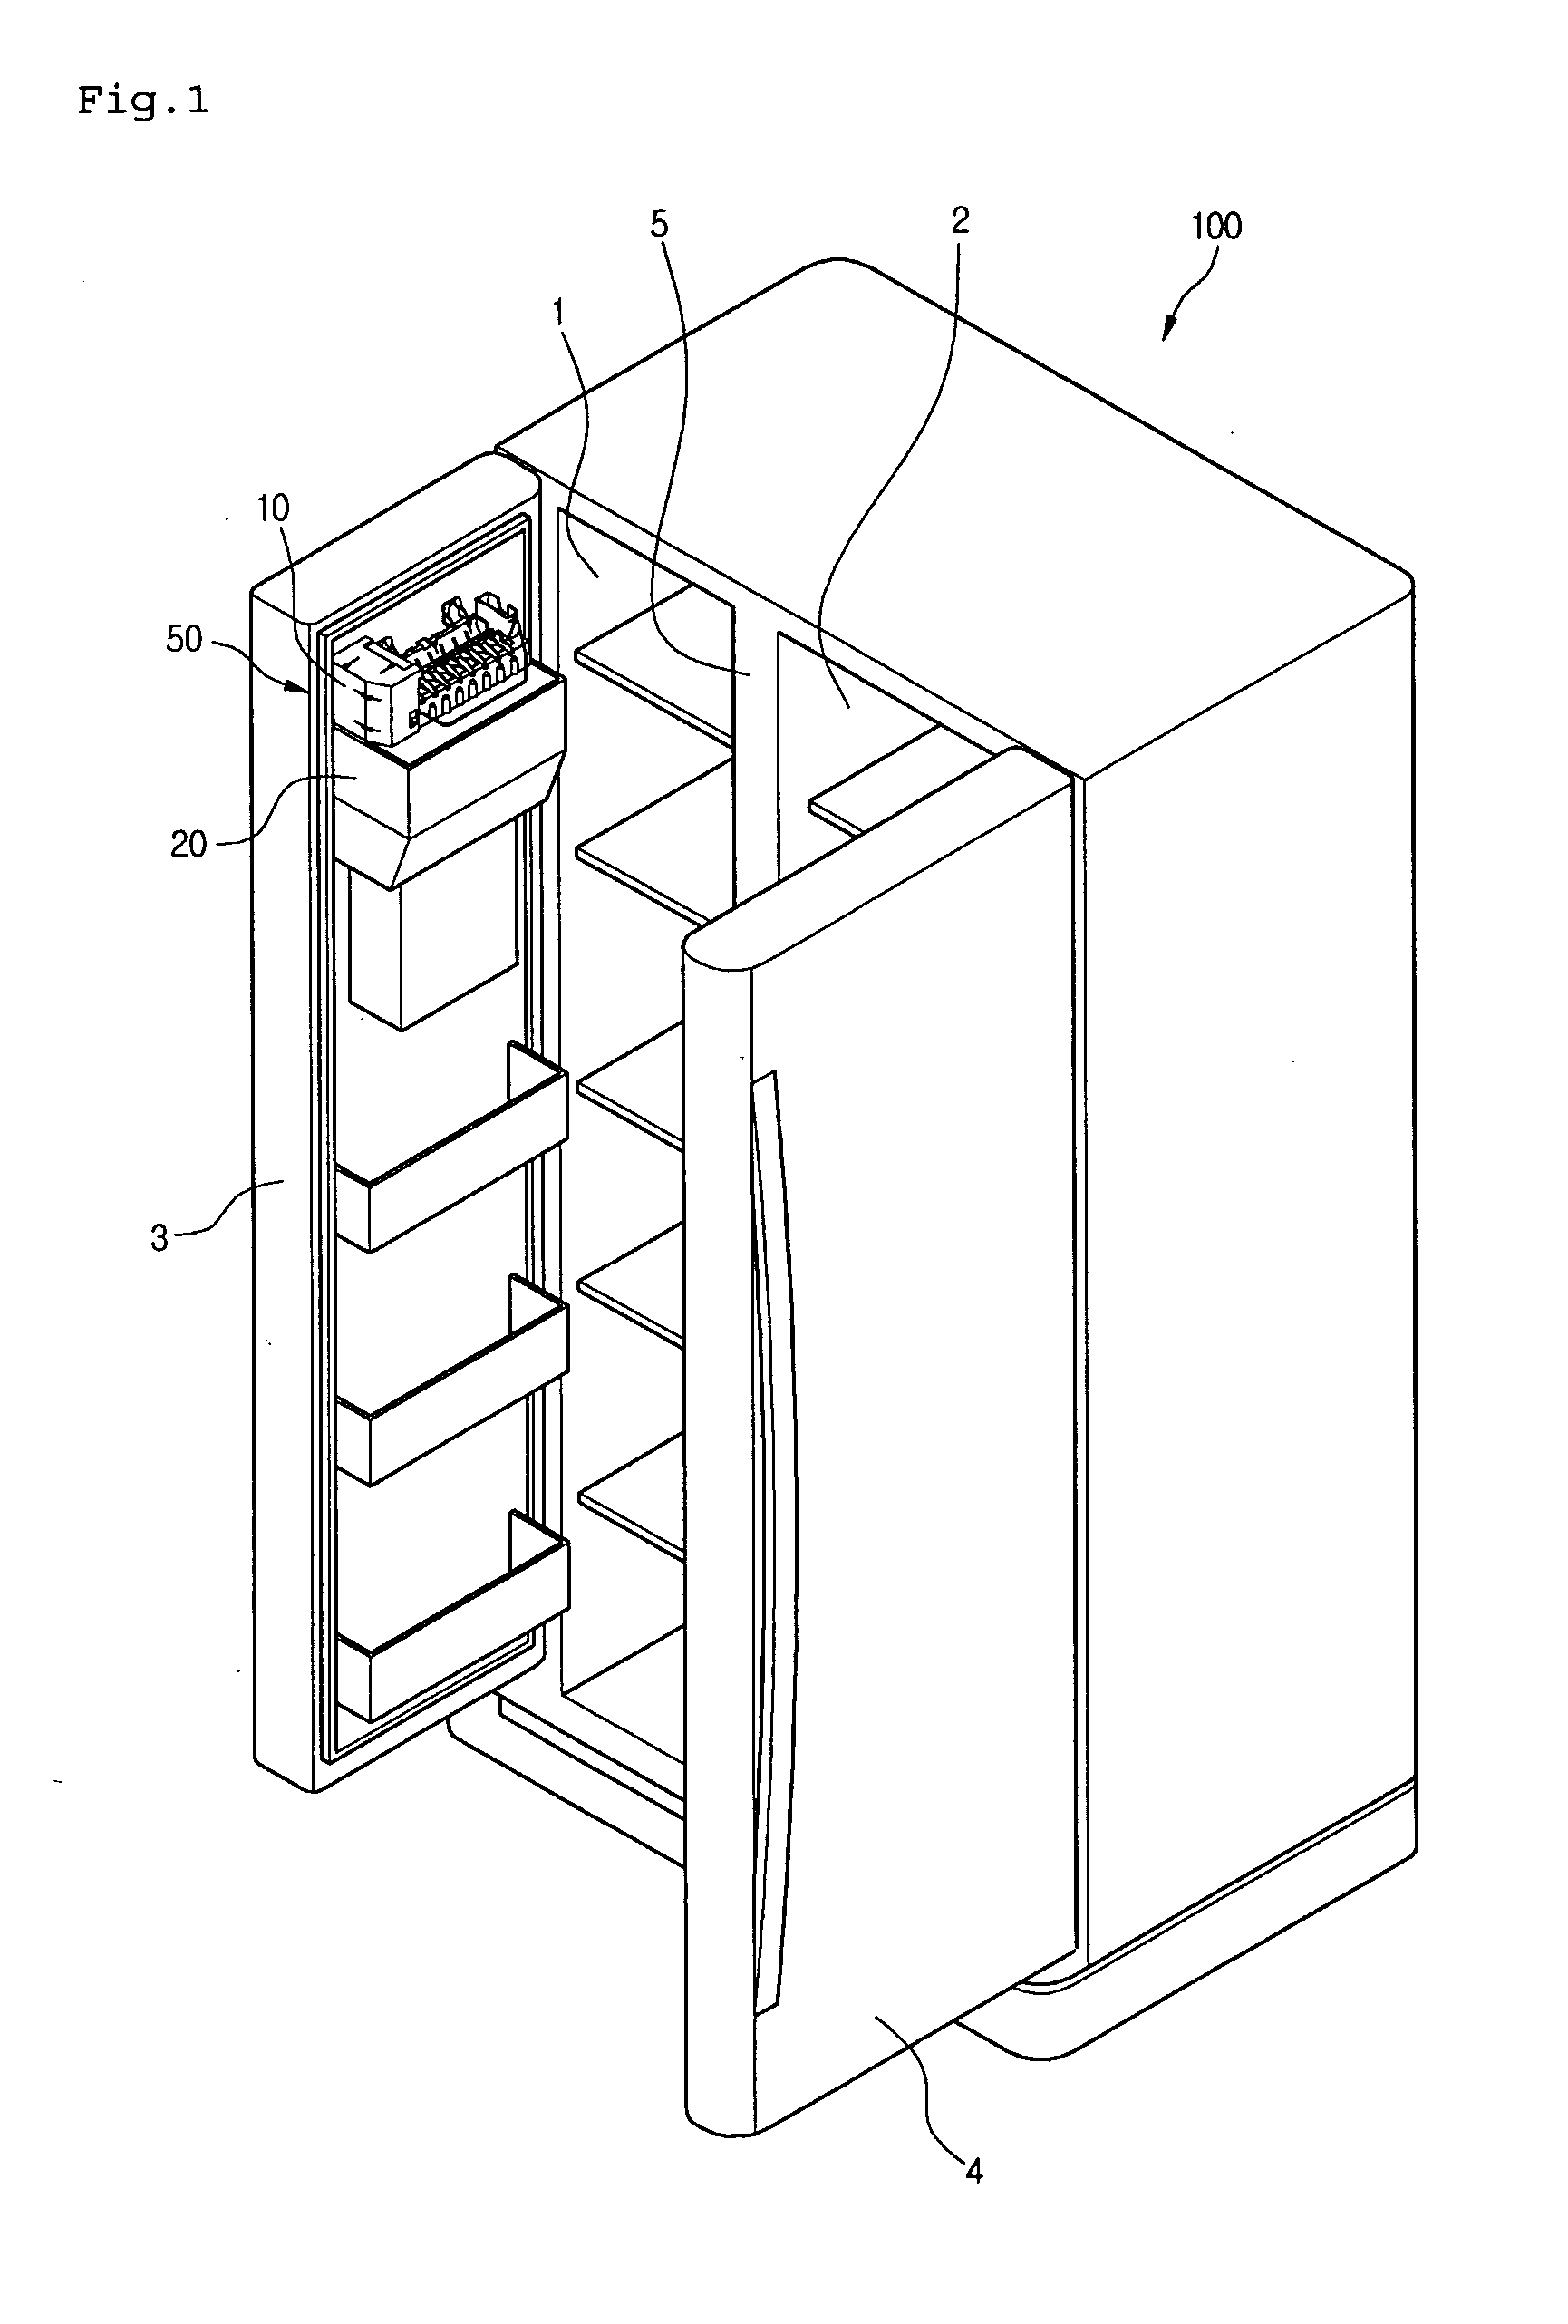 Cold air path structure of refrigerator